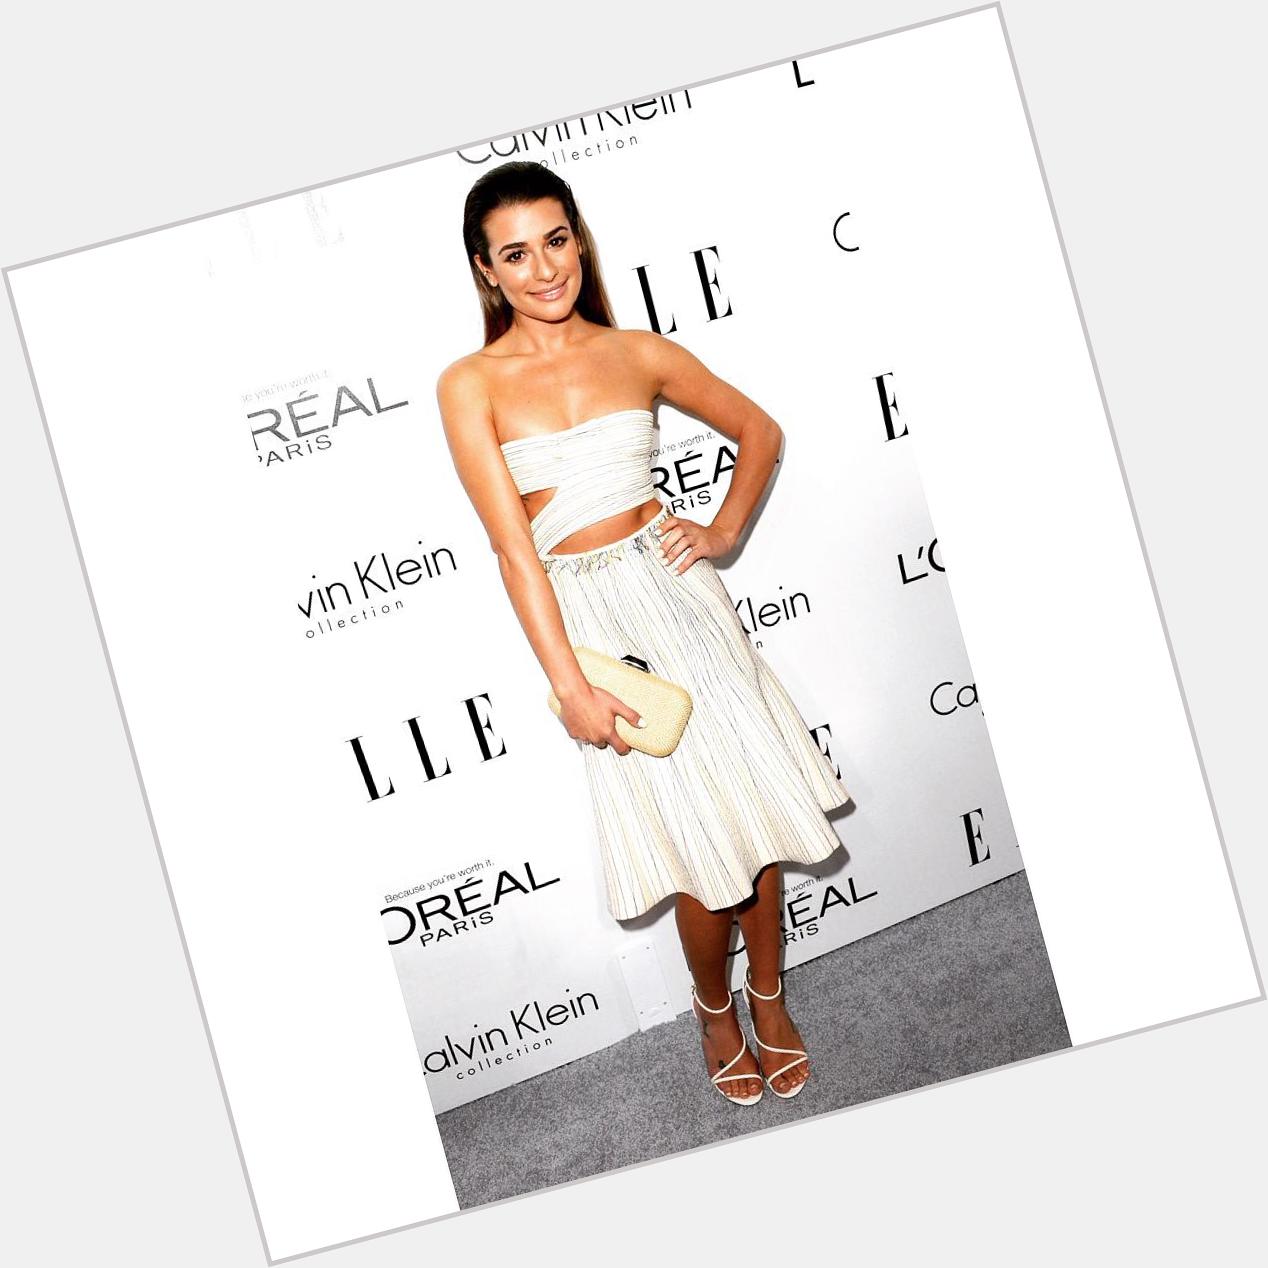 Happy 29th birthday to the talented Lea Michele. TRUTH Magazine wishes you all the best.  